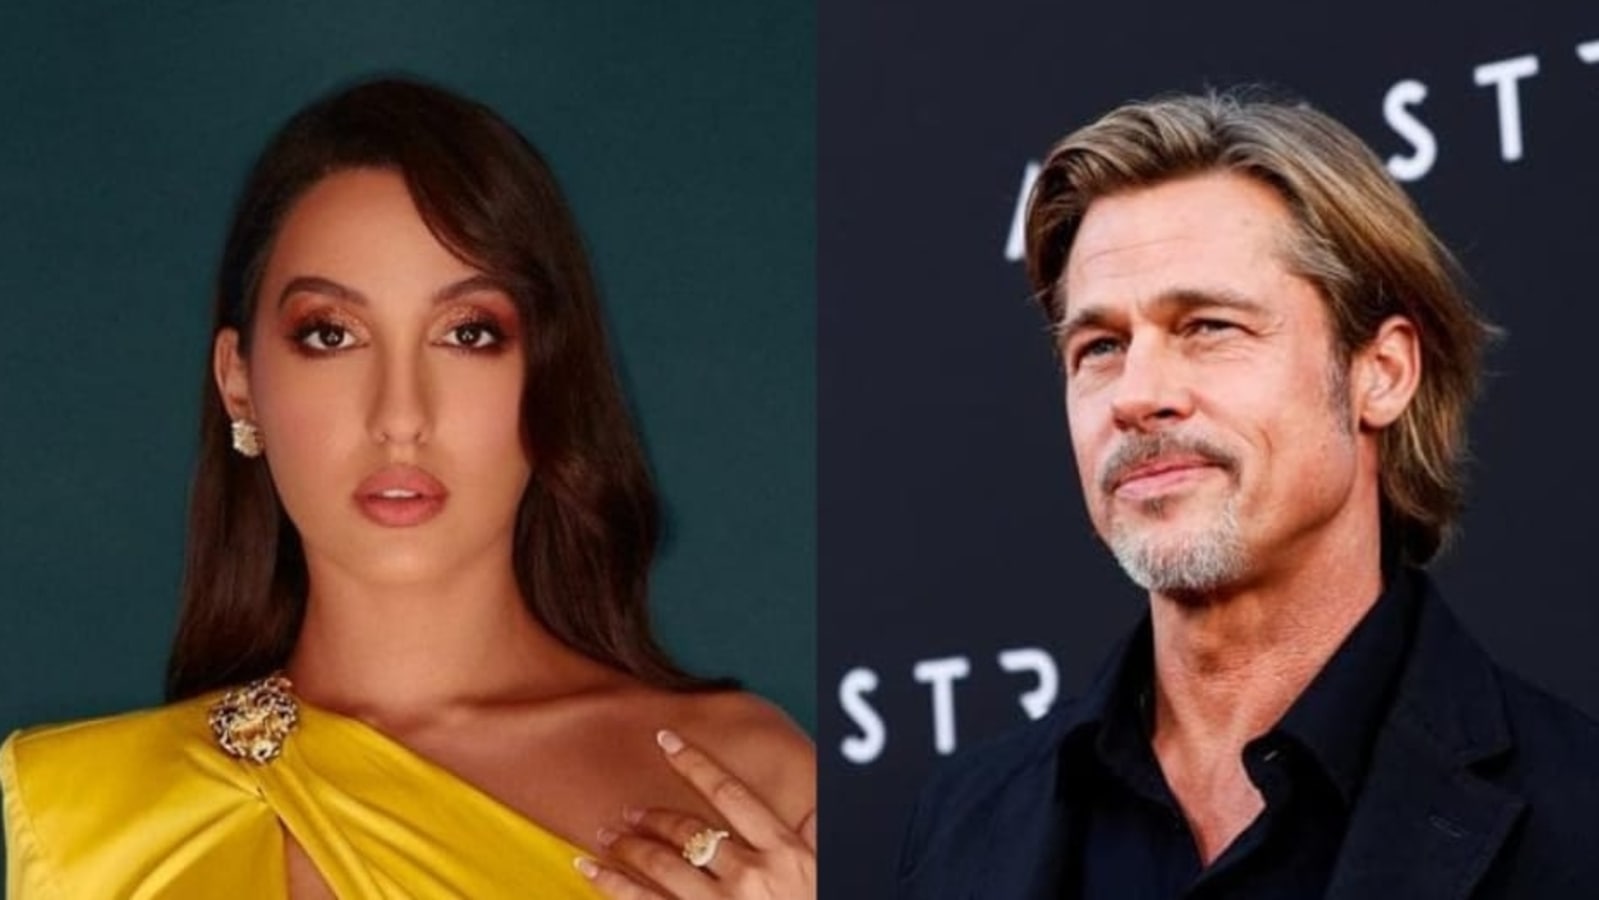 Nora Fatehi says Brad Pitt slid into her DMs; Reddit has a hard time believing Bollywood